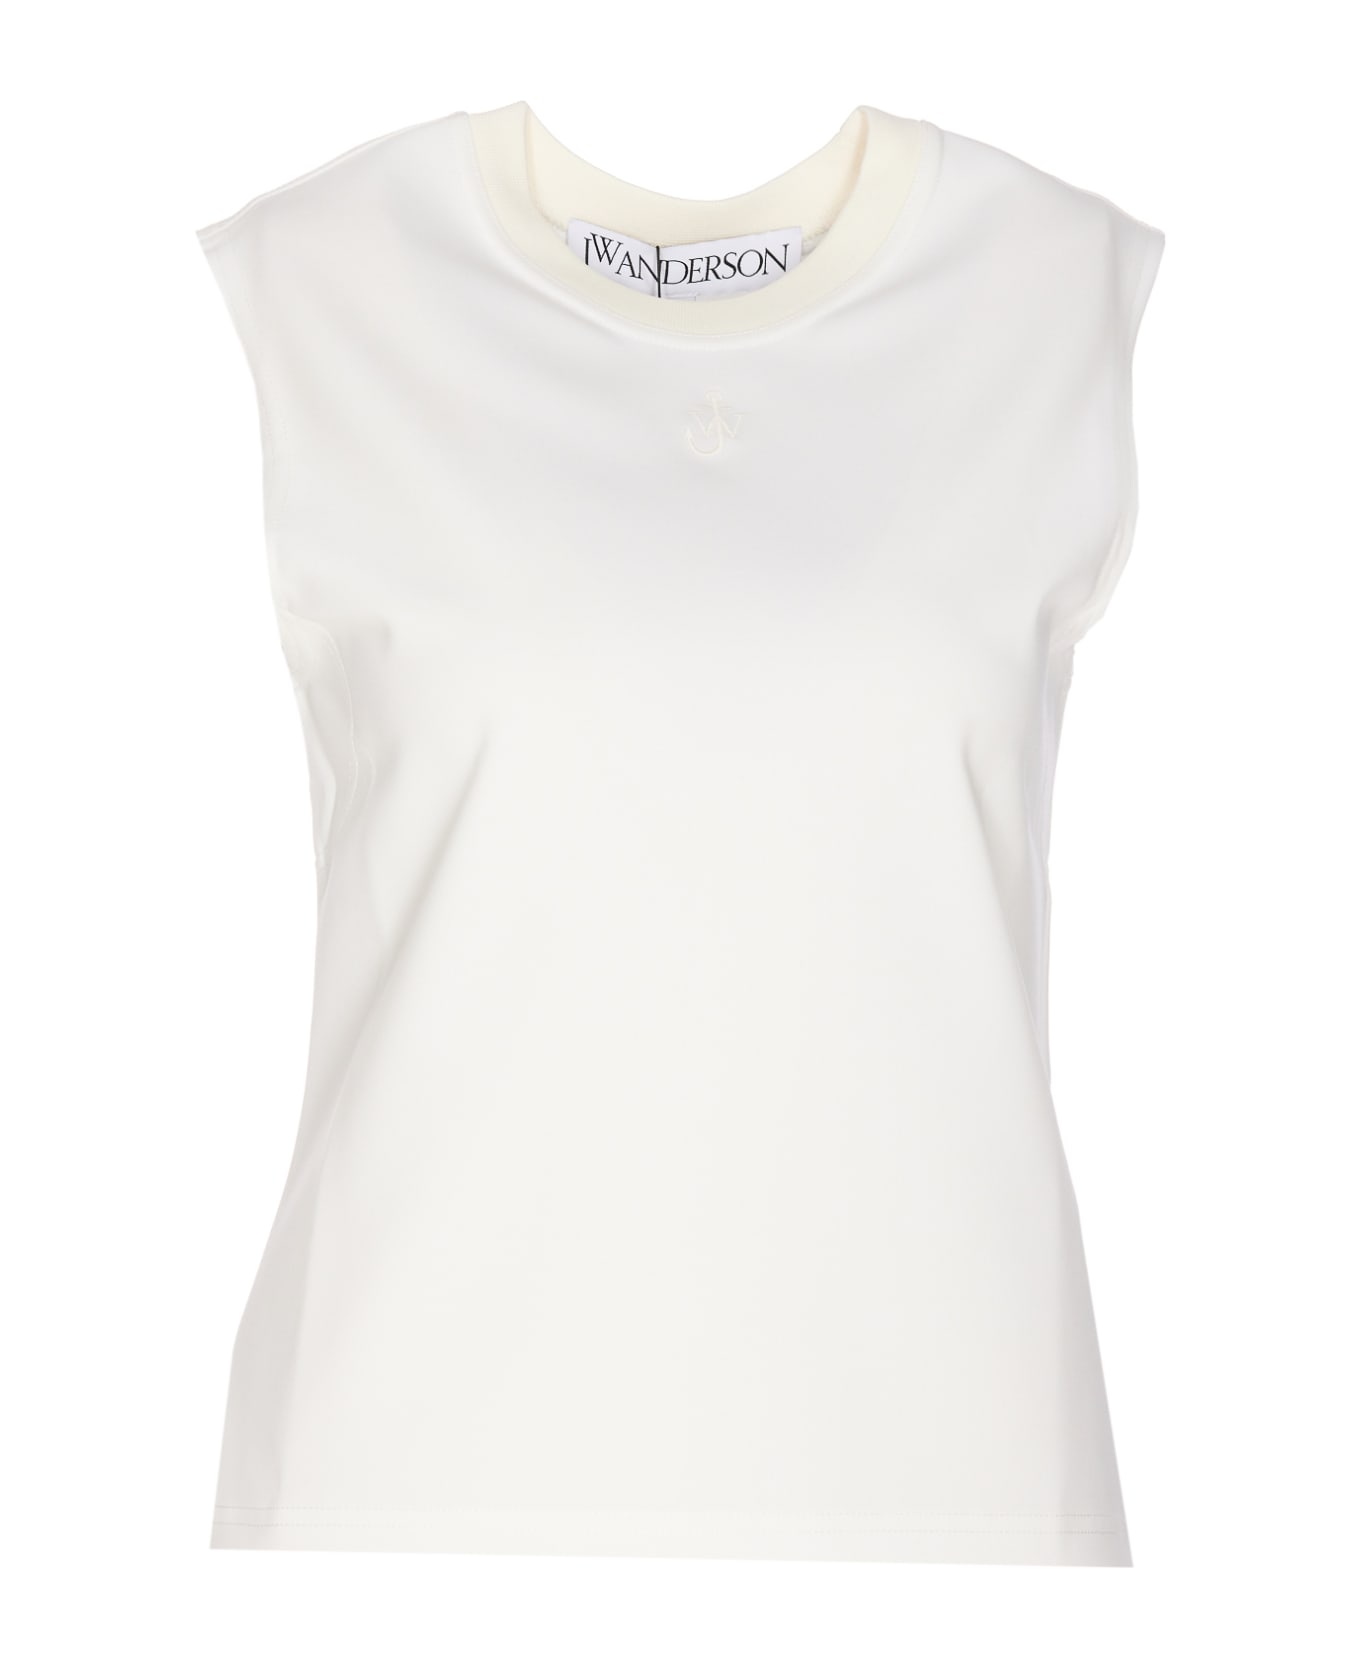 J.W. Anderson Embroidered Jwa Logo Tank Top - White